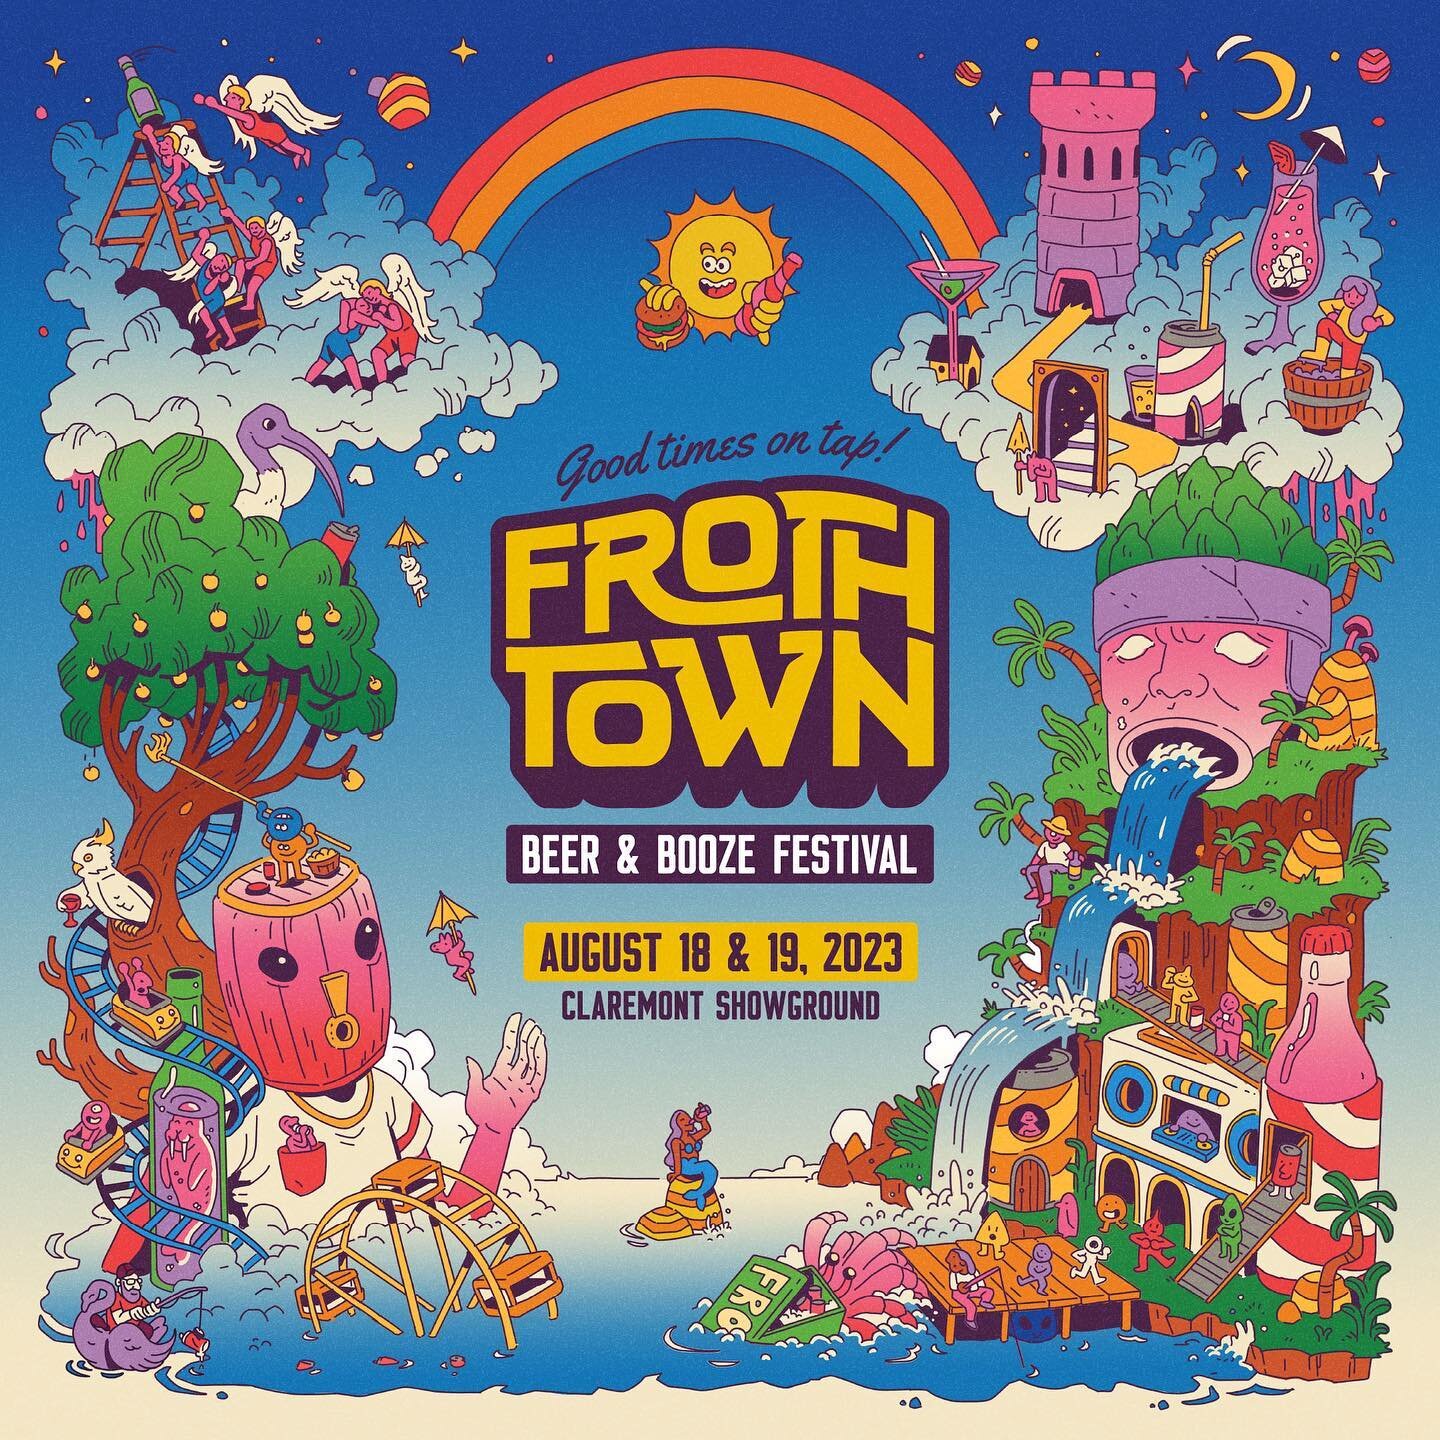 @froth.town 2023 🍻 Beer &amp; Booze Festival
Returns to Claremont Showground 🎡
August 18th &amp; 19th

🎟 Tickets on sale Wednesday 26th April